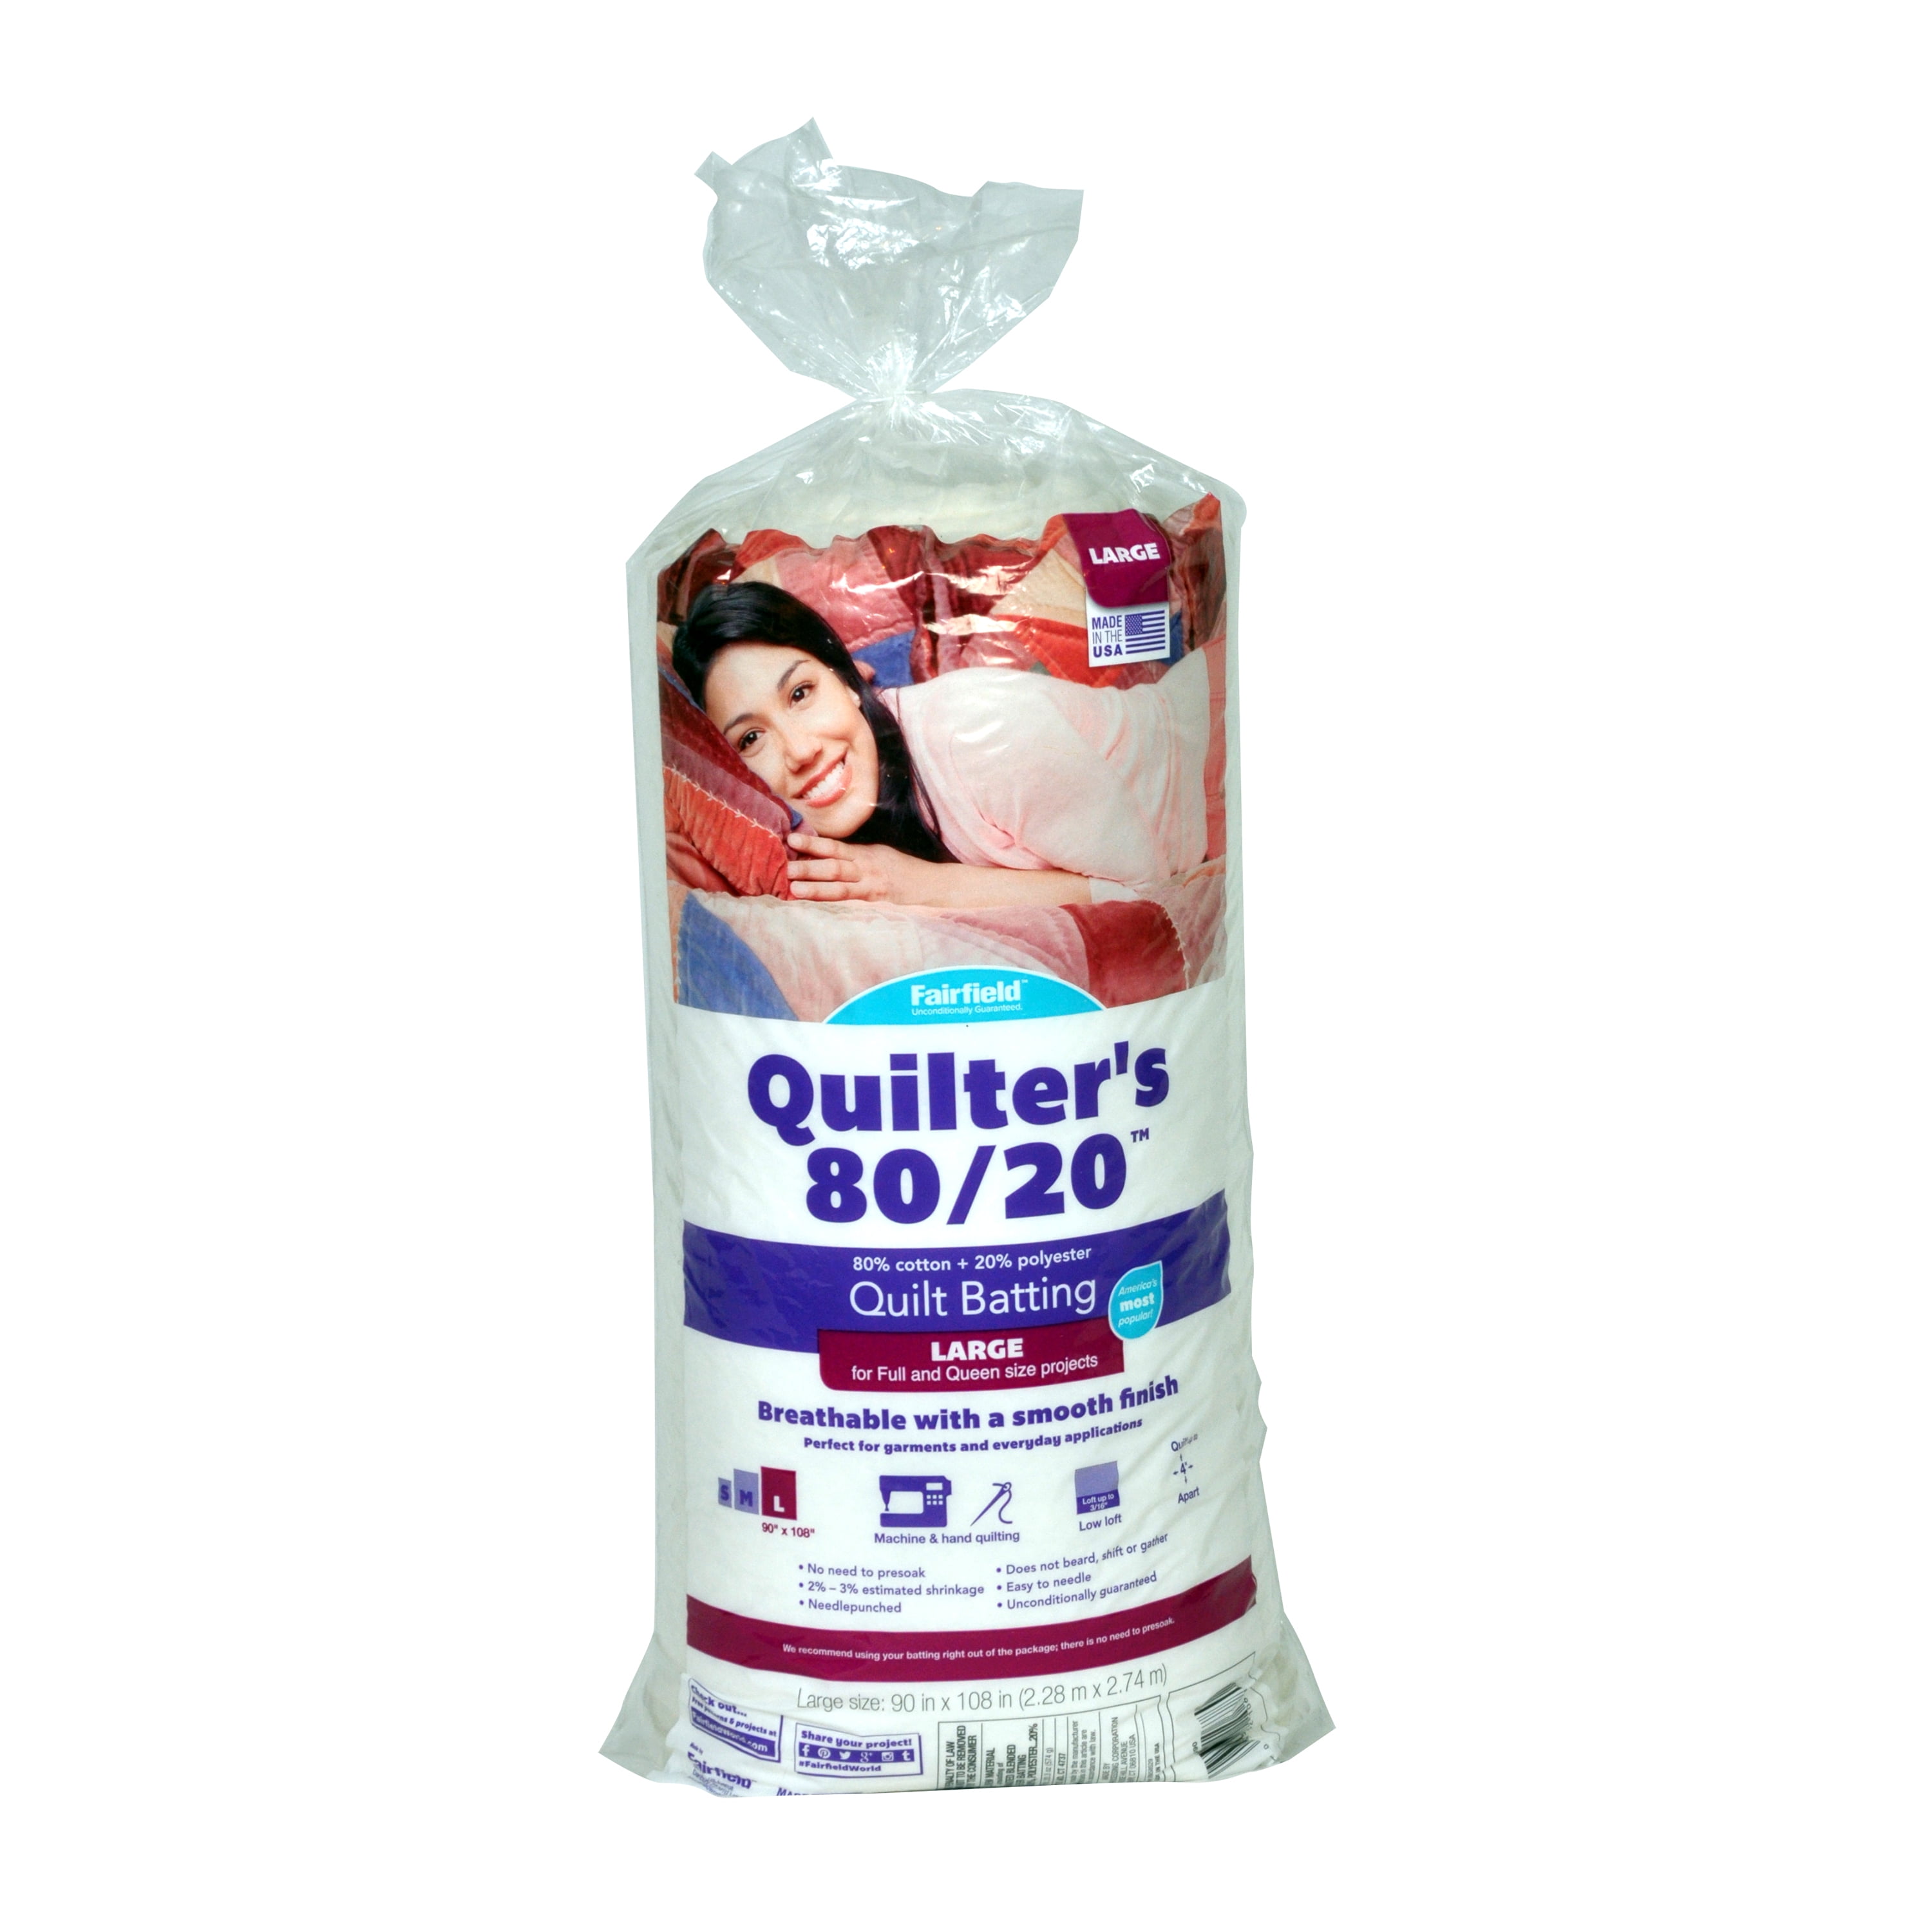 Quilters 80/20 Quilt Batting by Fairfield, 90 inch x 108 inch